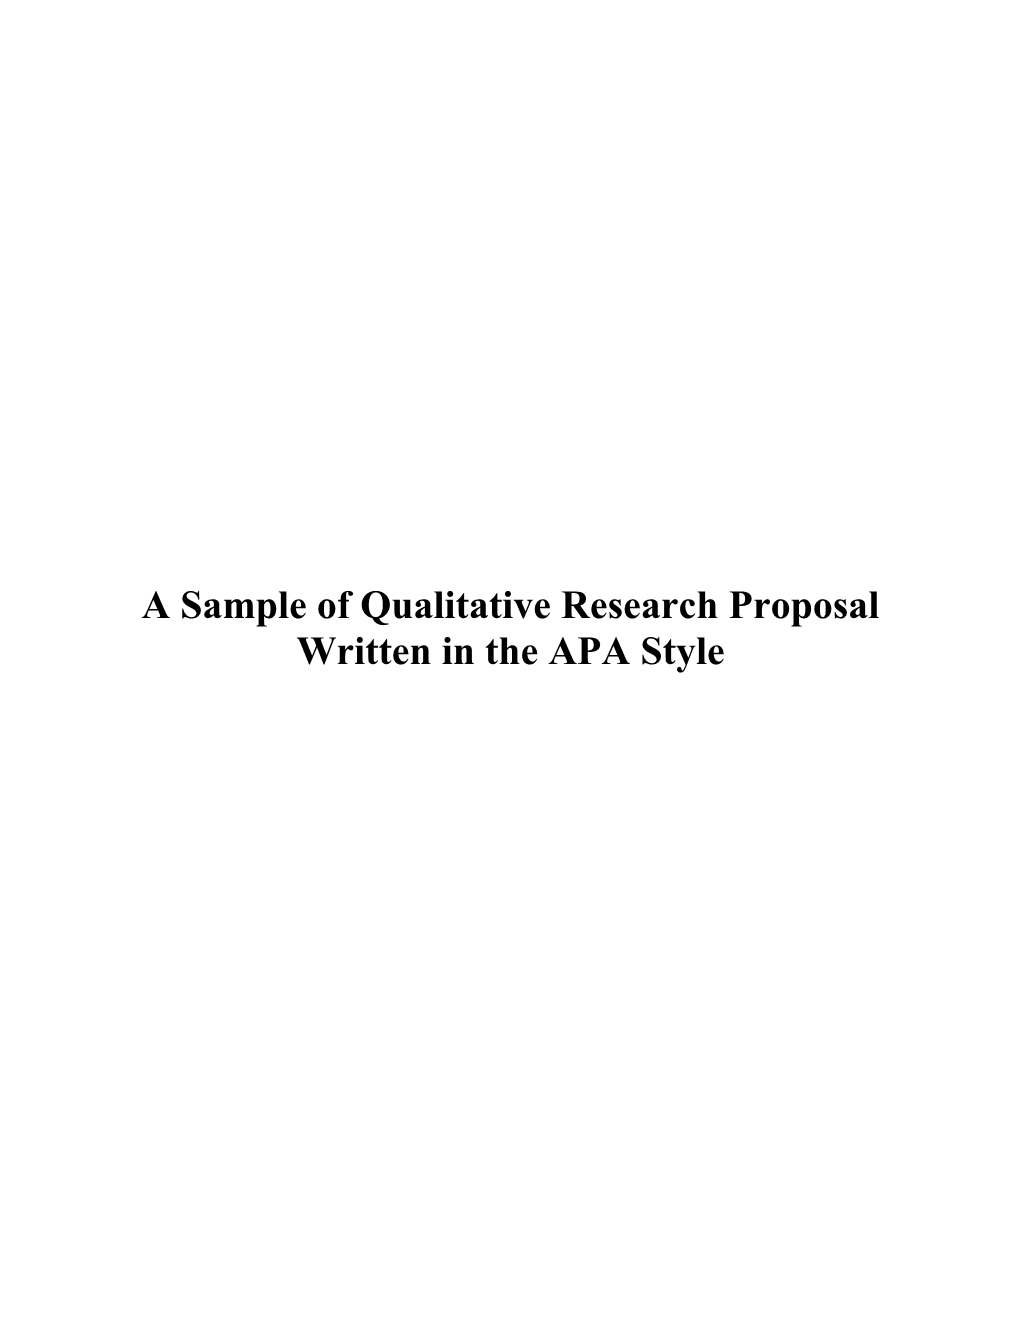 A Sample of Qualitative Research Proposal Written in the APA Style